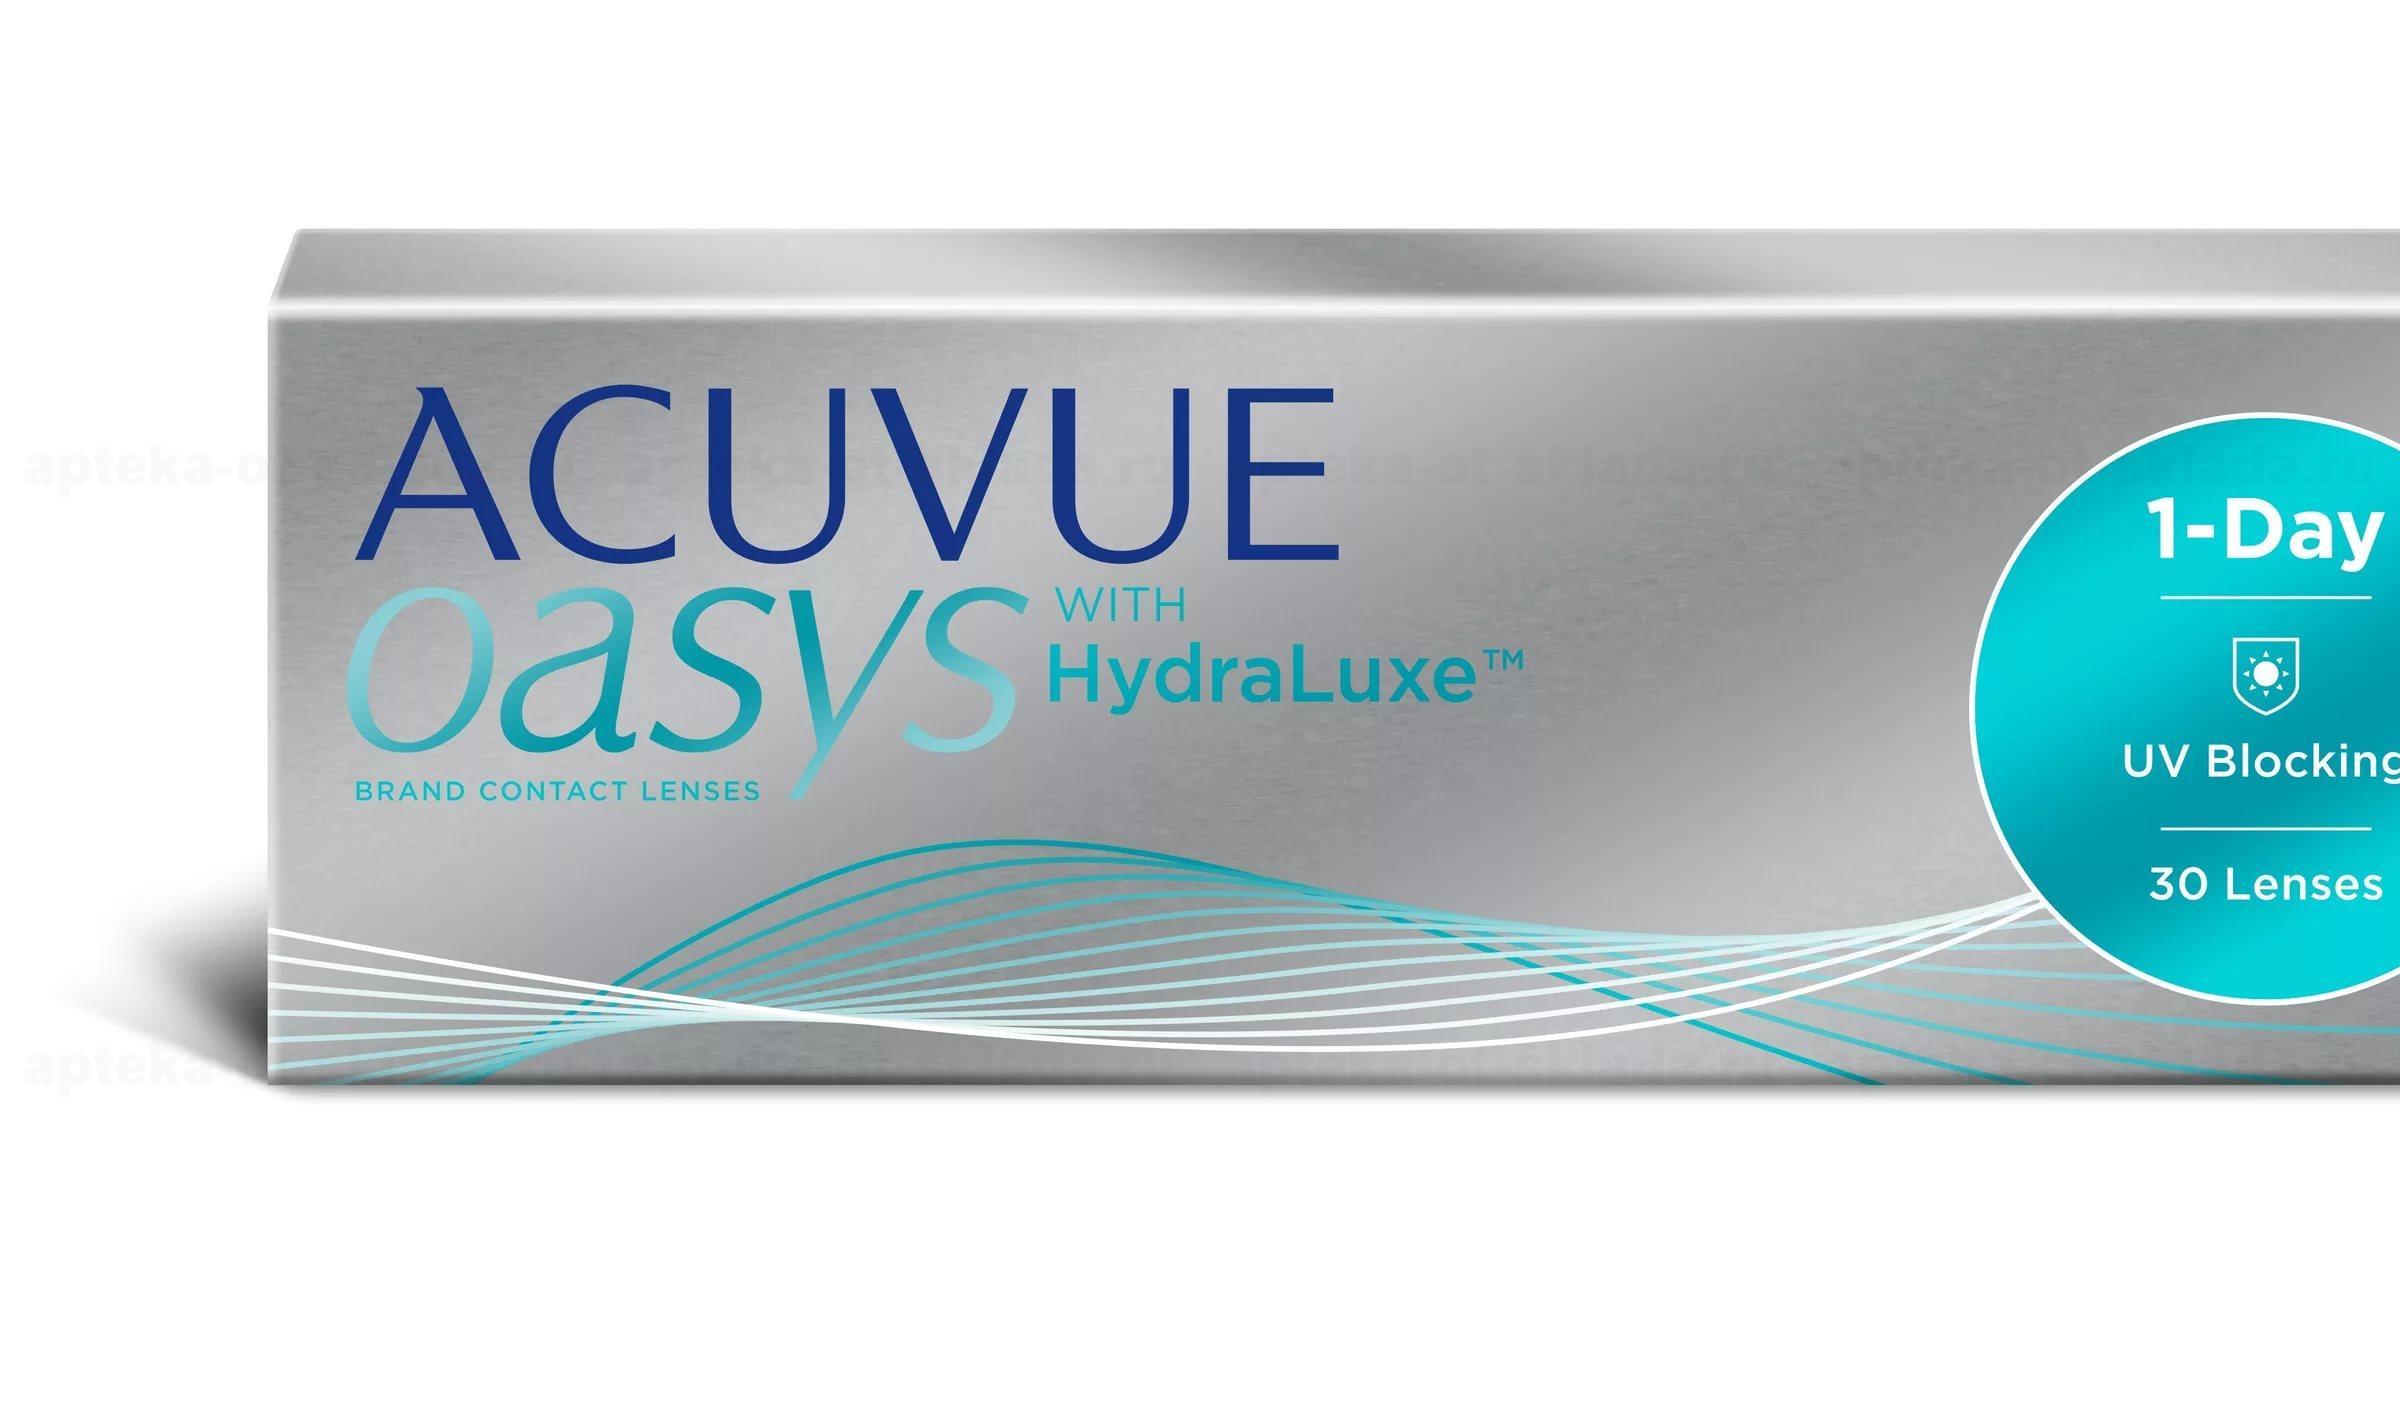 Day we contact. Acuvue Oasys 1-Day. Acuvue Oasys 1-Day with Hydraluxe for Astigmatism. Acuvue Oasys 1-Day with Hydraluxe, 30 шт. Линзы Acuvue Oasys Hydraluxe.